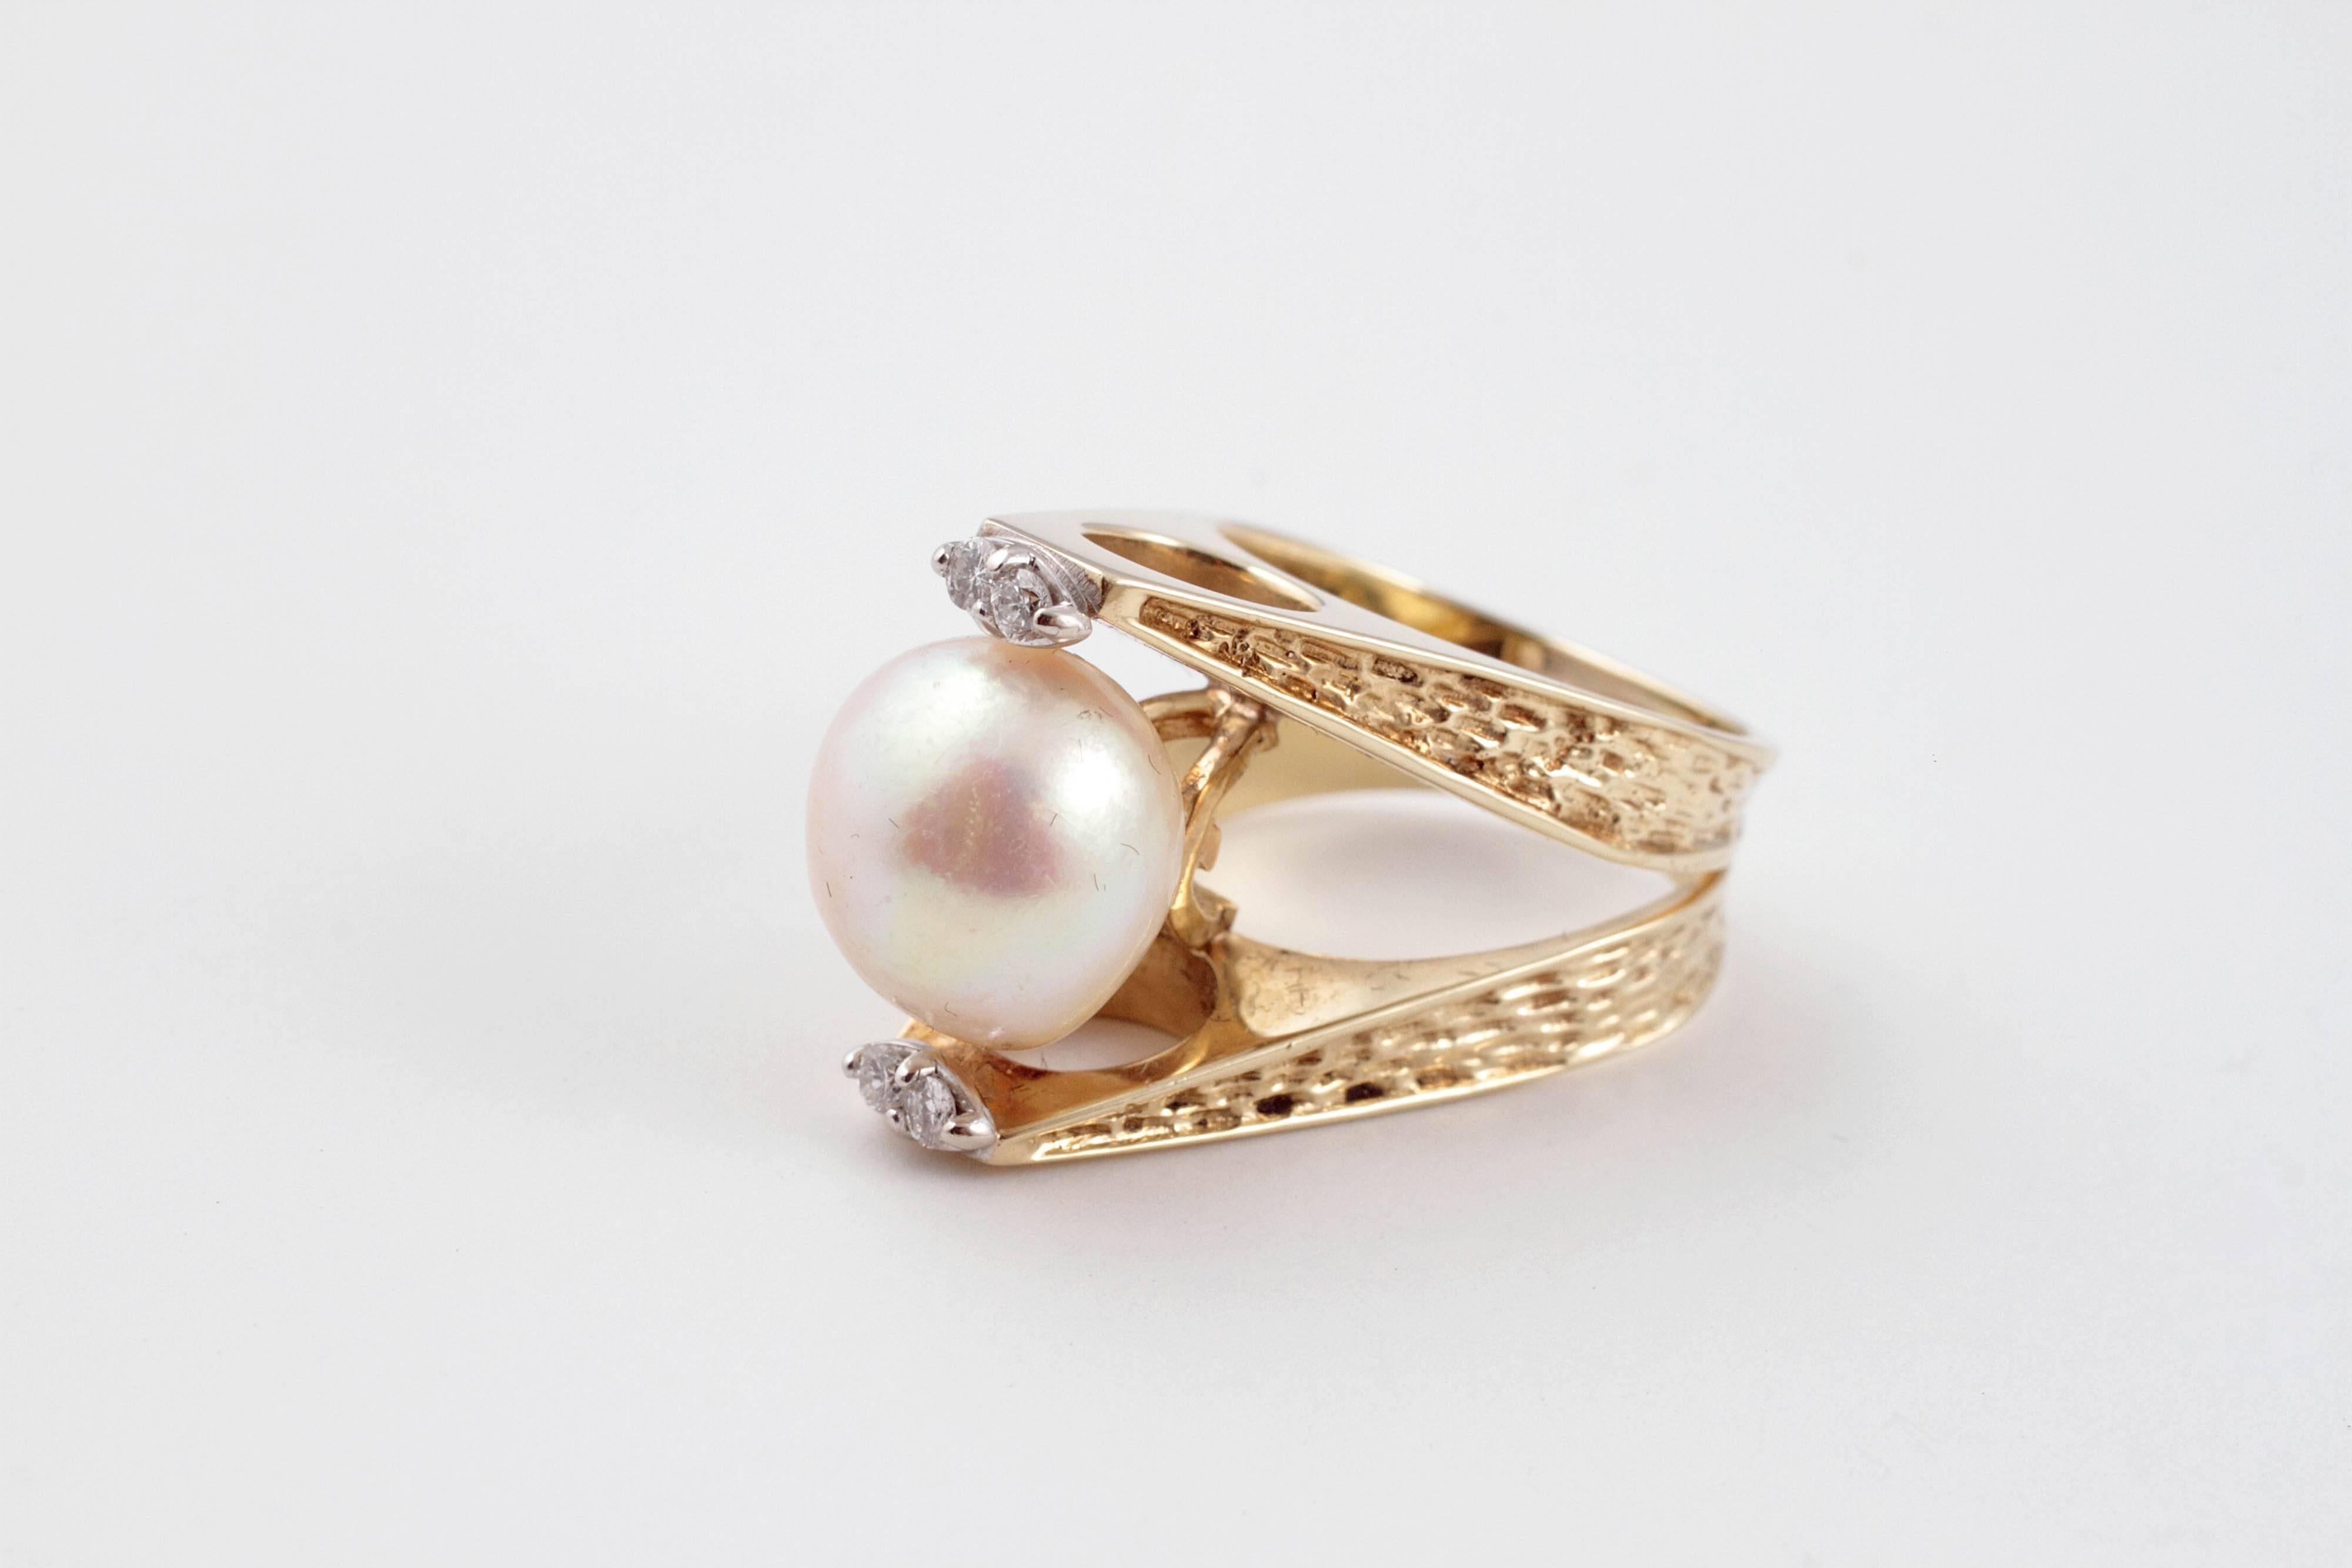 11.35 mm cultured pearl ring with diamond accents in textured yellow gold linear style mounting.  Size 6.